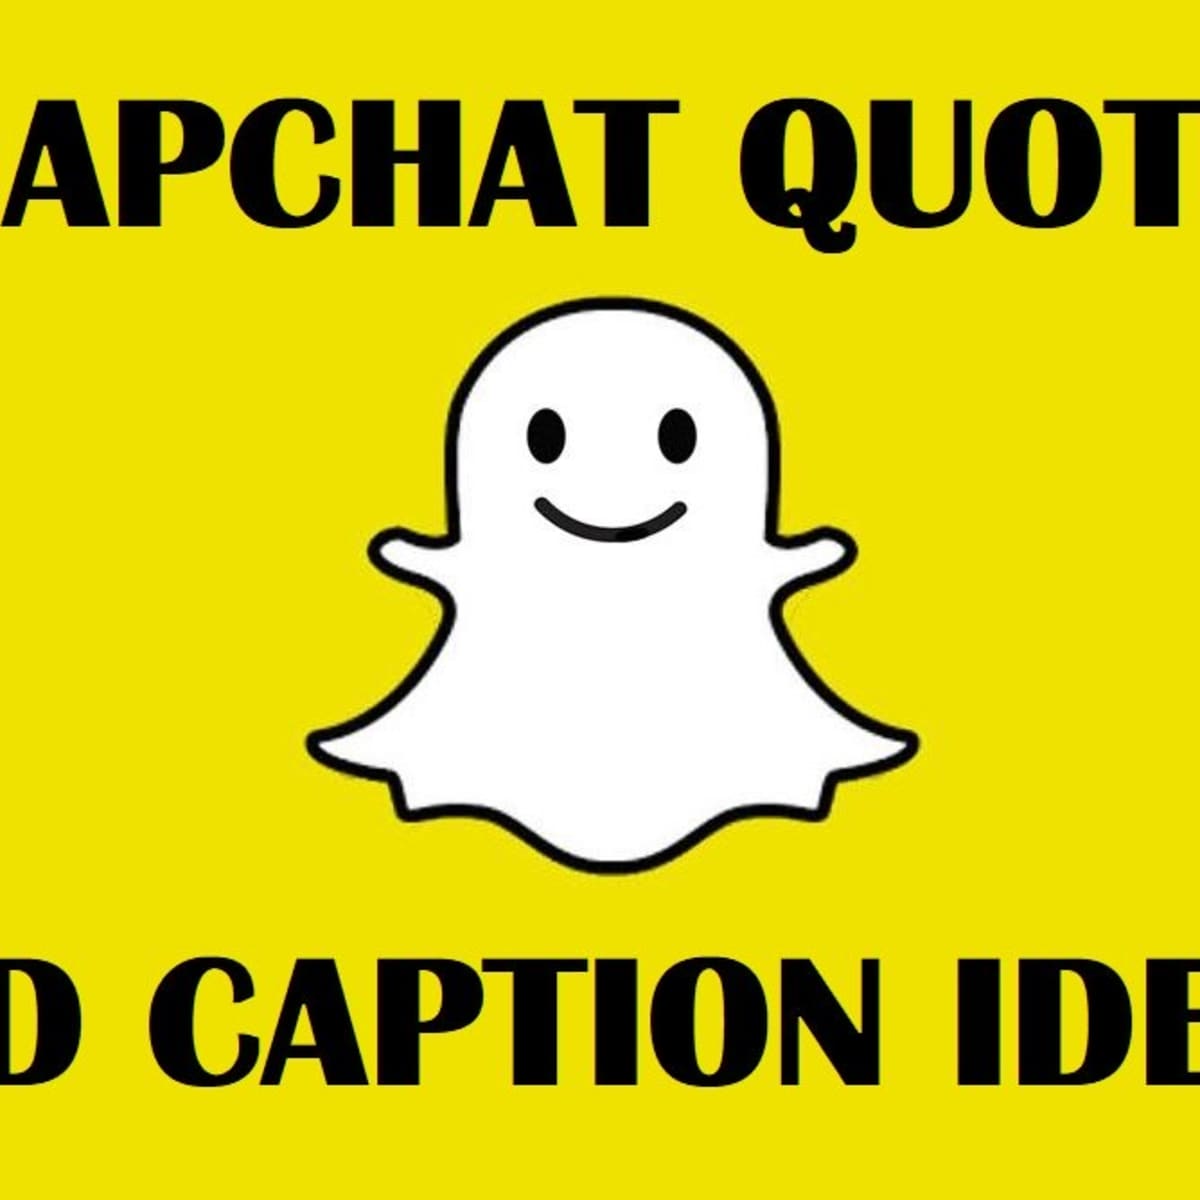 150 Snapchat Quotes and Caption Ideas - TurboFuture